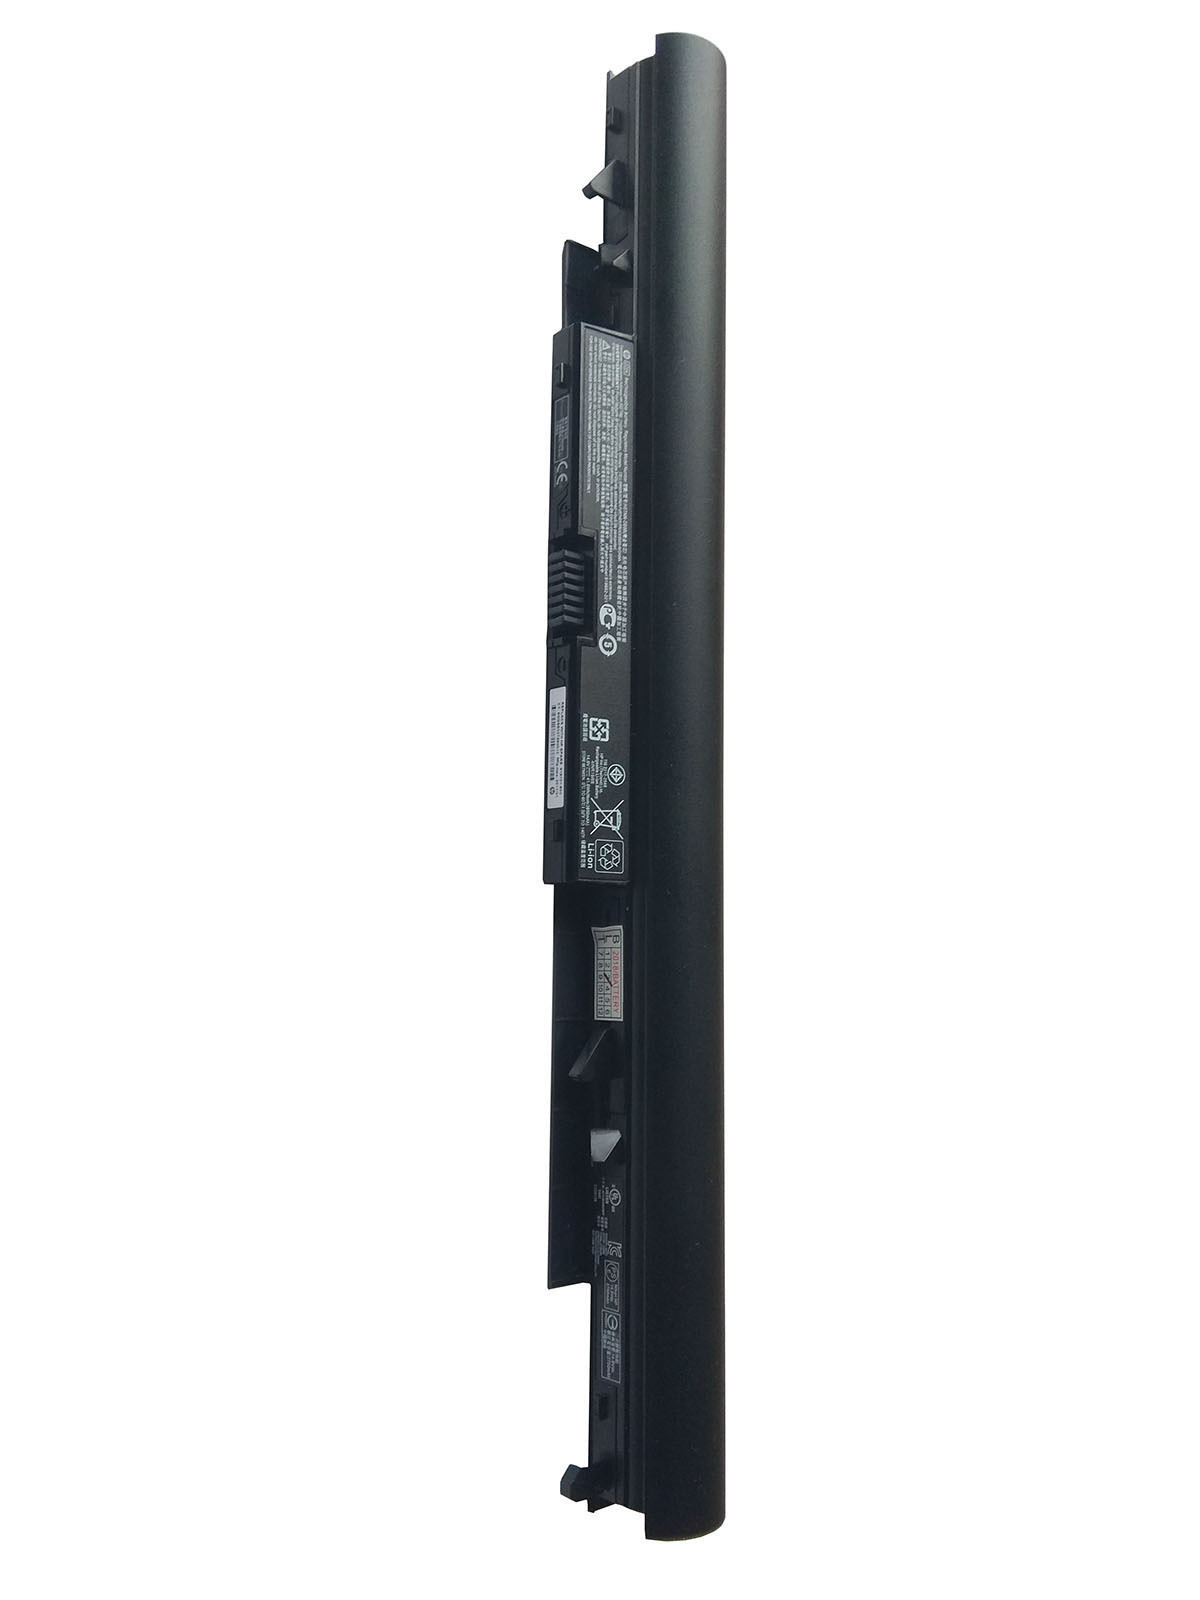 Primary image for HP Notebook 15-BW060NA 2FP45EA Battery JC04 919701-850 HSTNN-DB8B